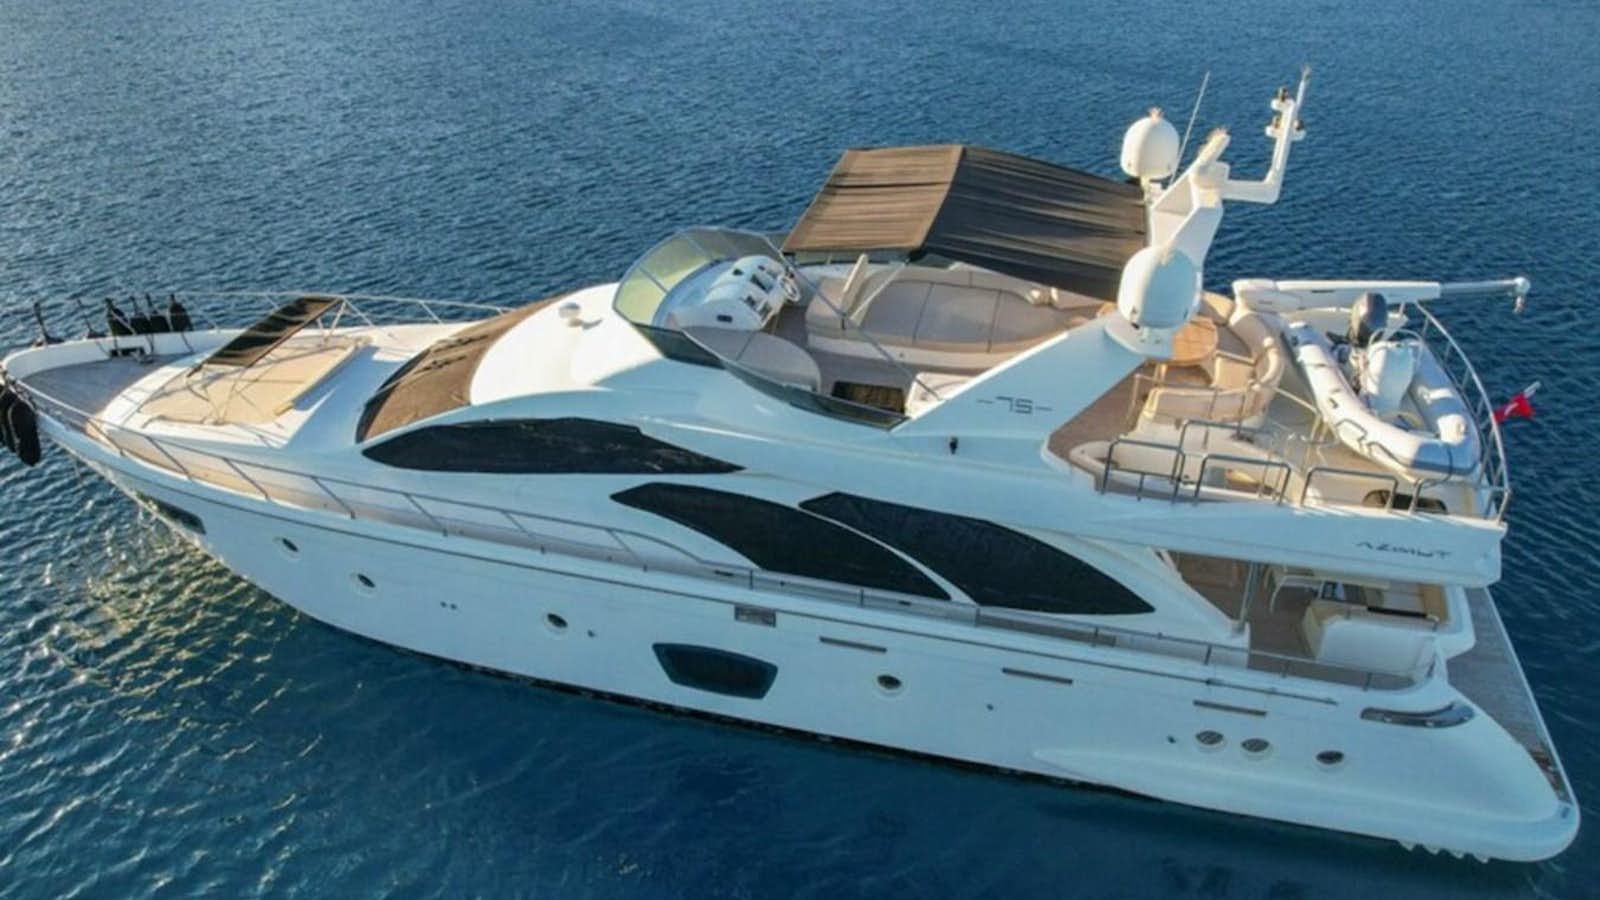 C
Yacht for Sale